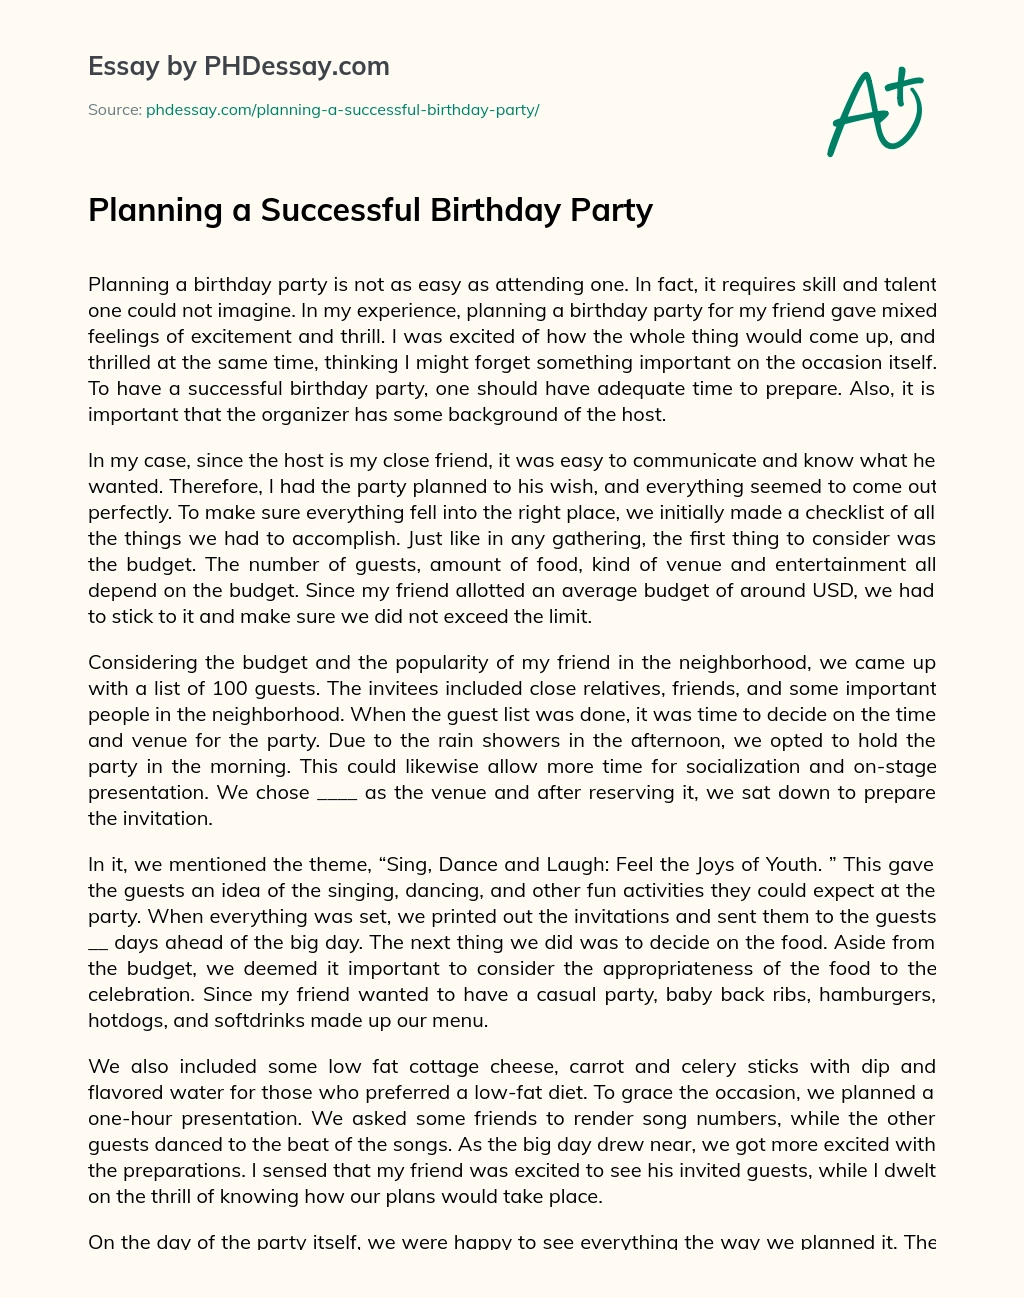 Planning a Successful Birthday Party essay